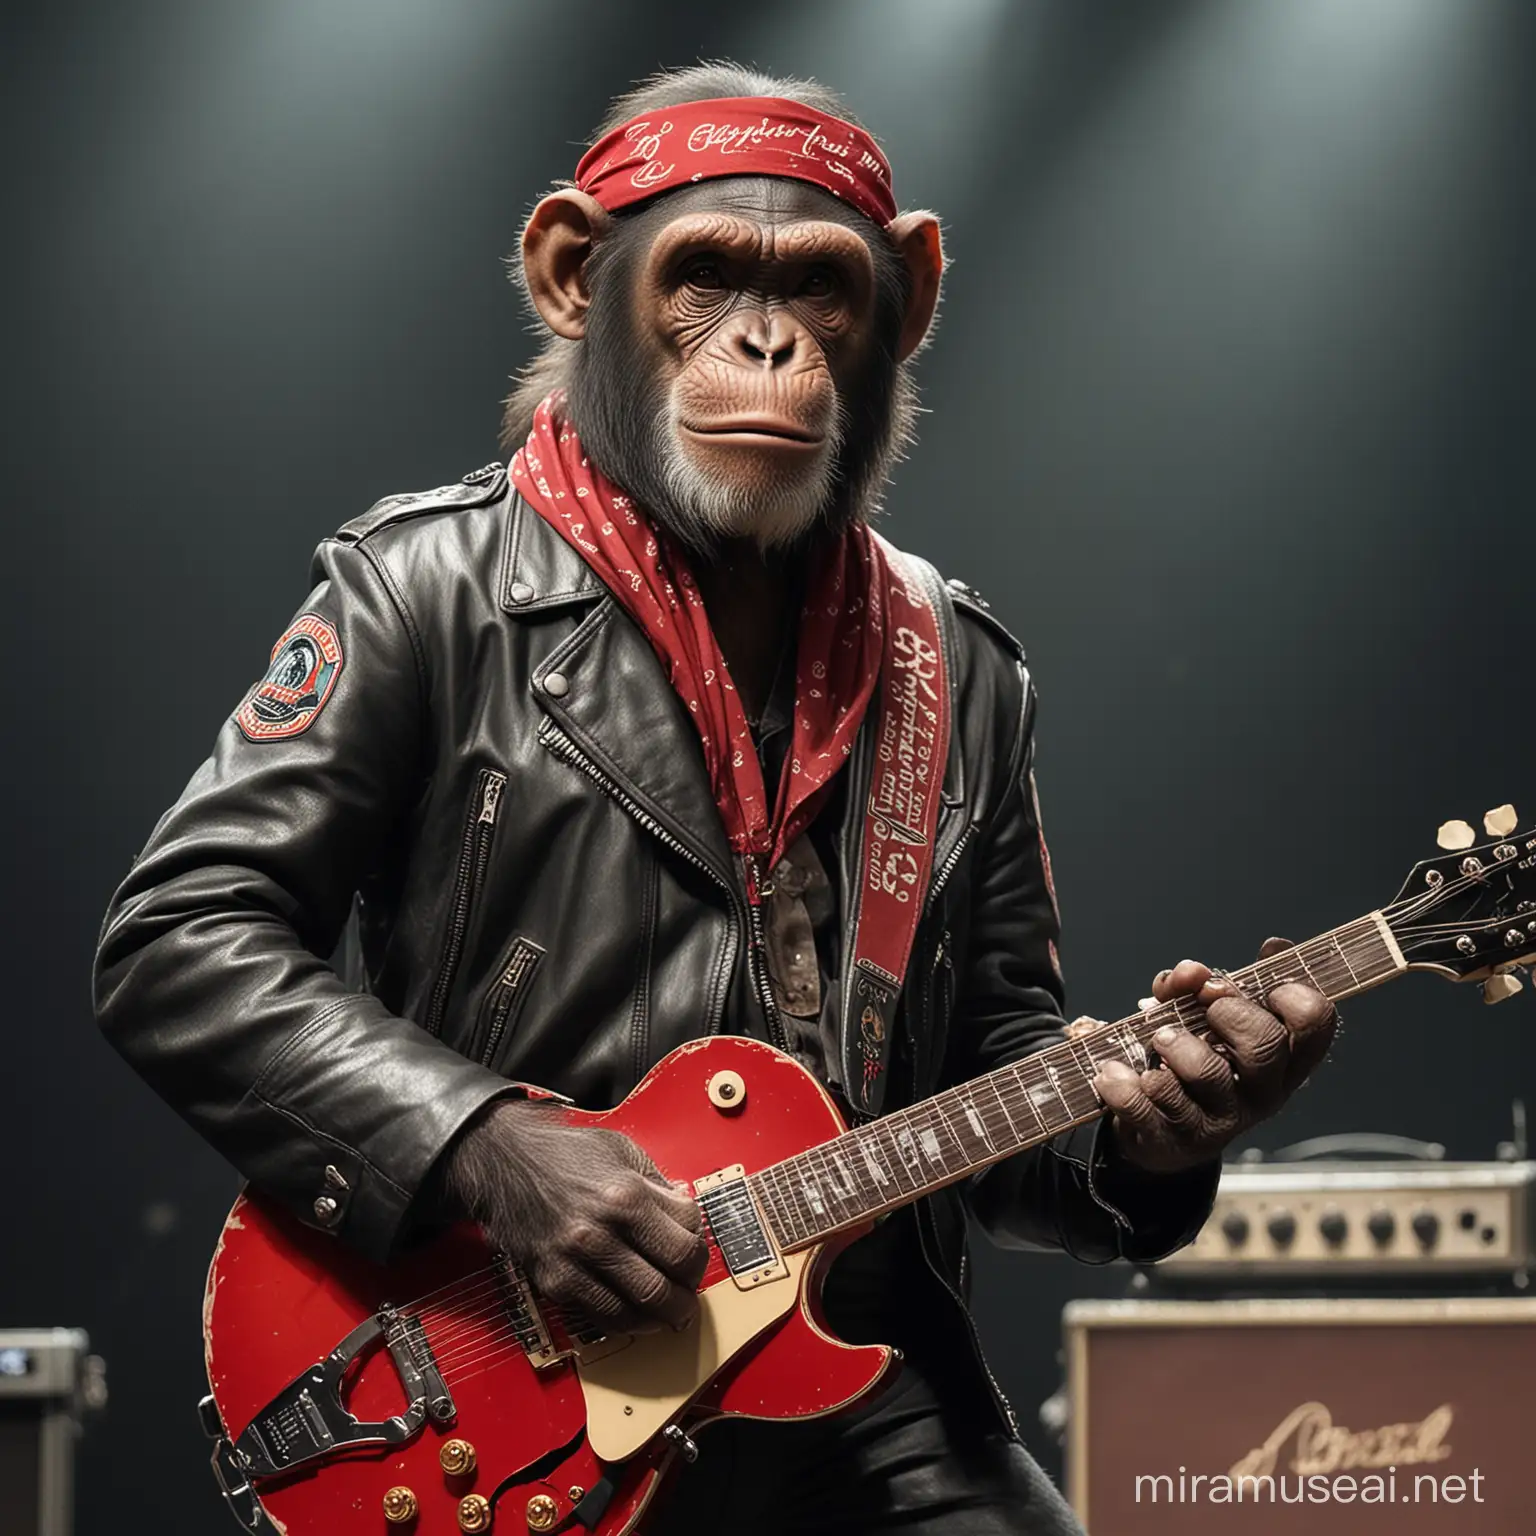 Rockstar Chimpanzee Playing Gibson Les Paul Guitar On Stage